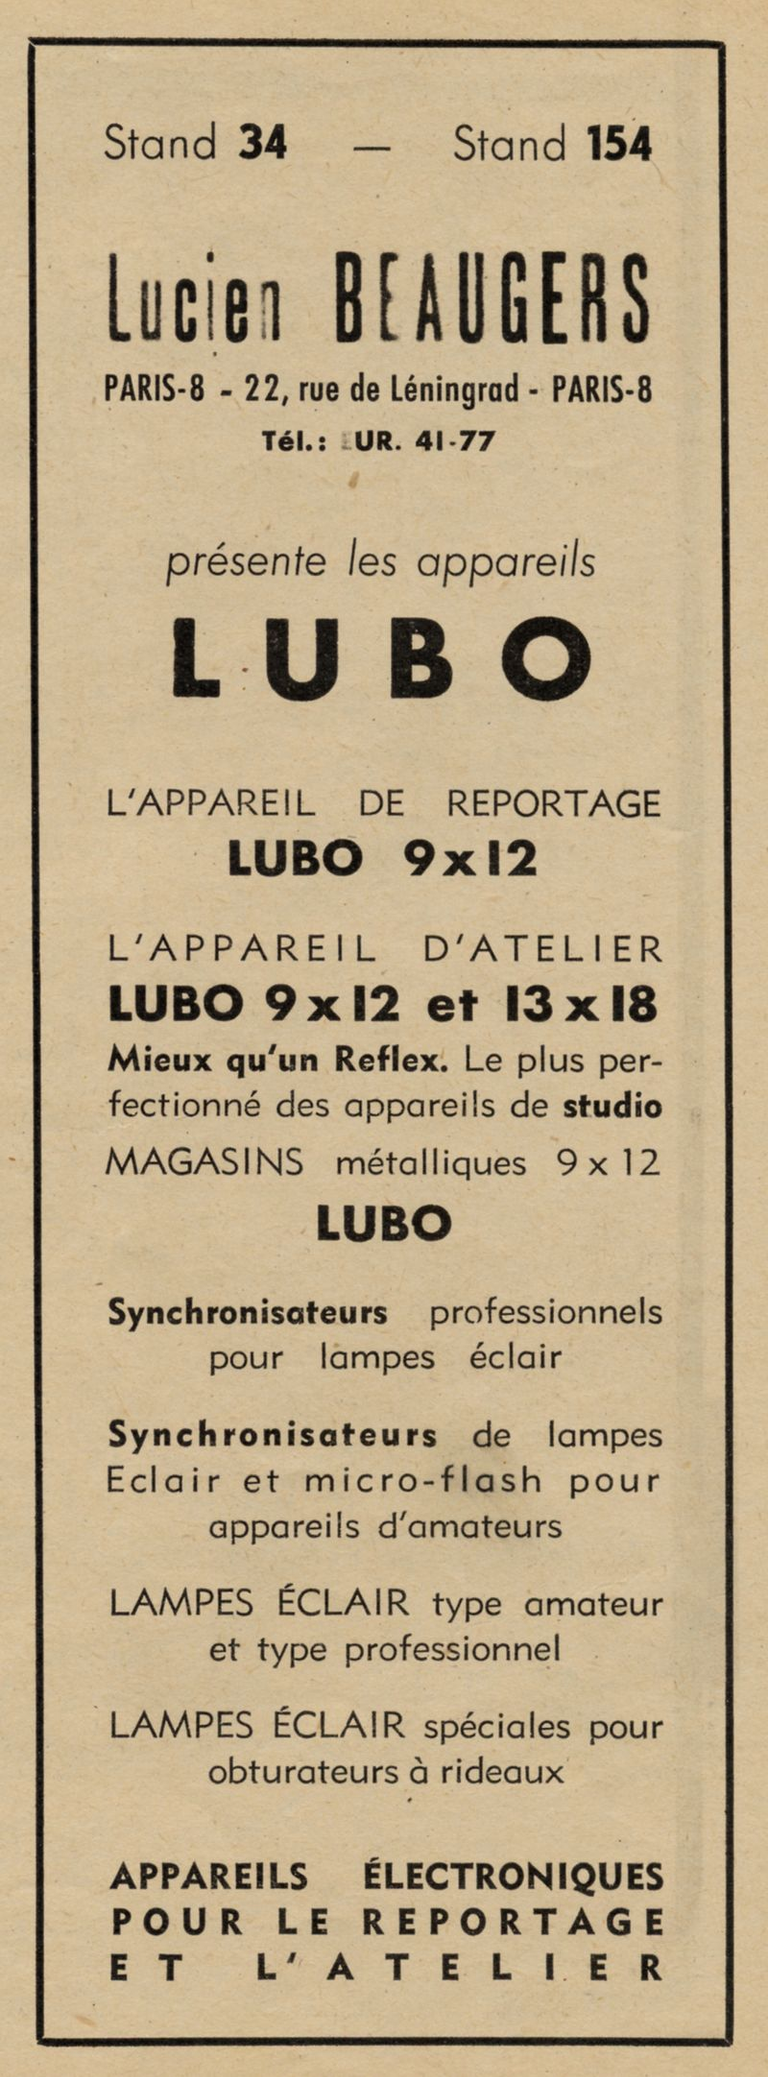 Beaugers - Lubo 48, synchronisateur, lampe éclair - 1949